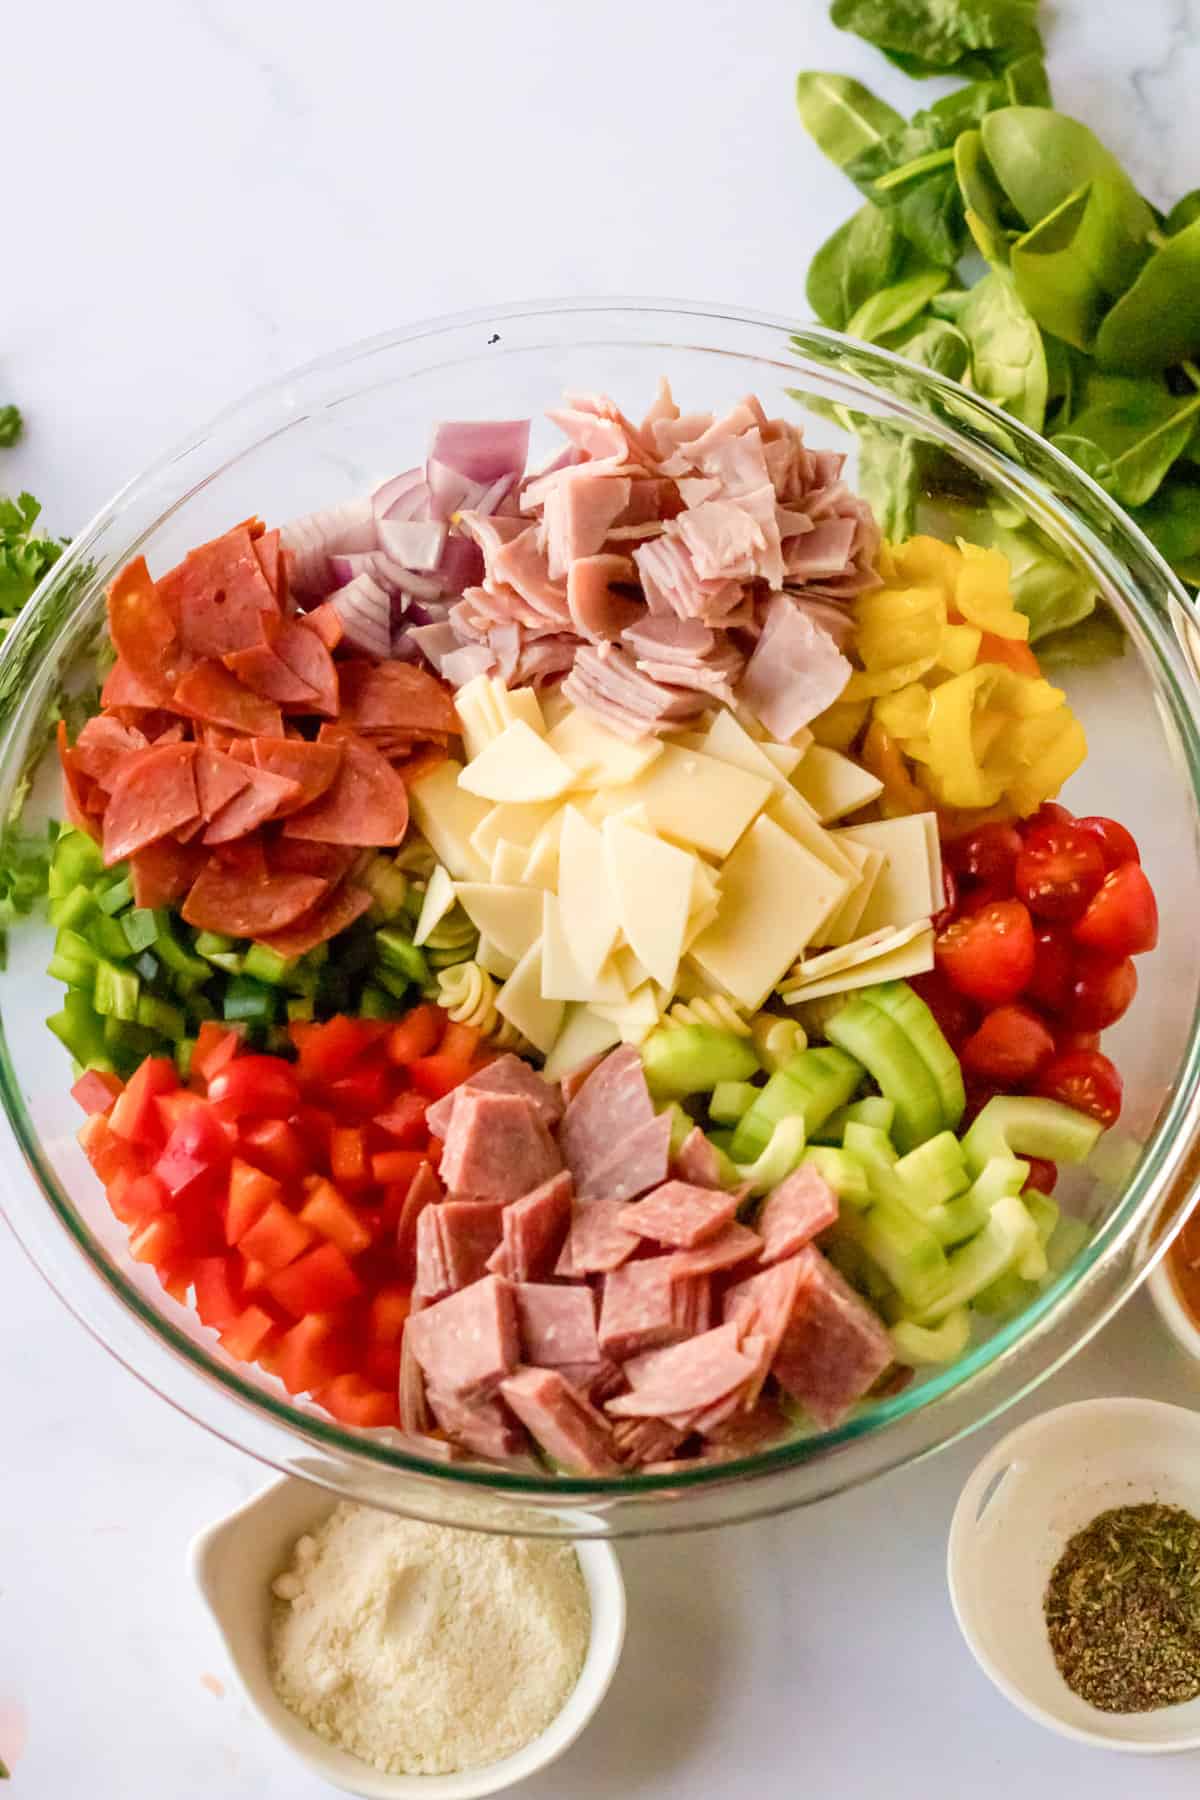 Glass bowl with chopped deli meat, cheese, and veggies.